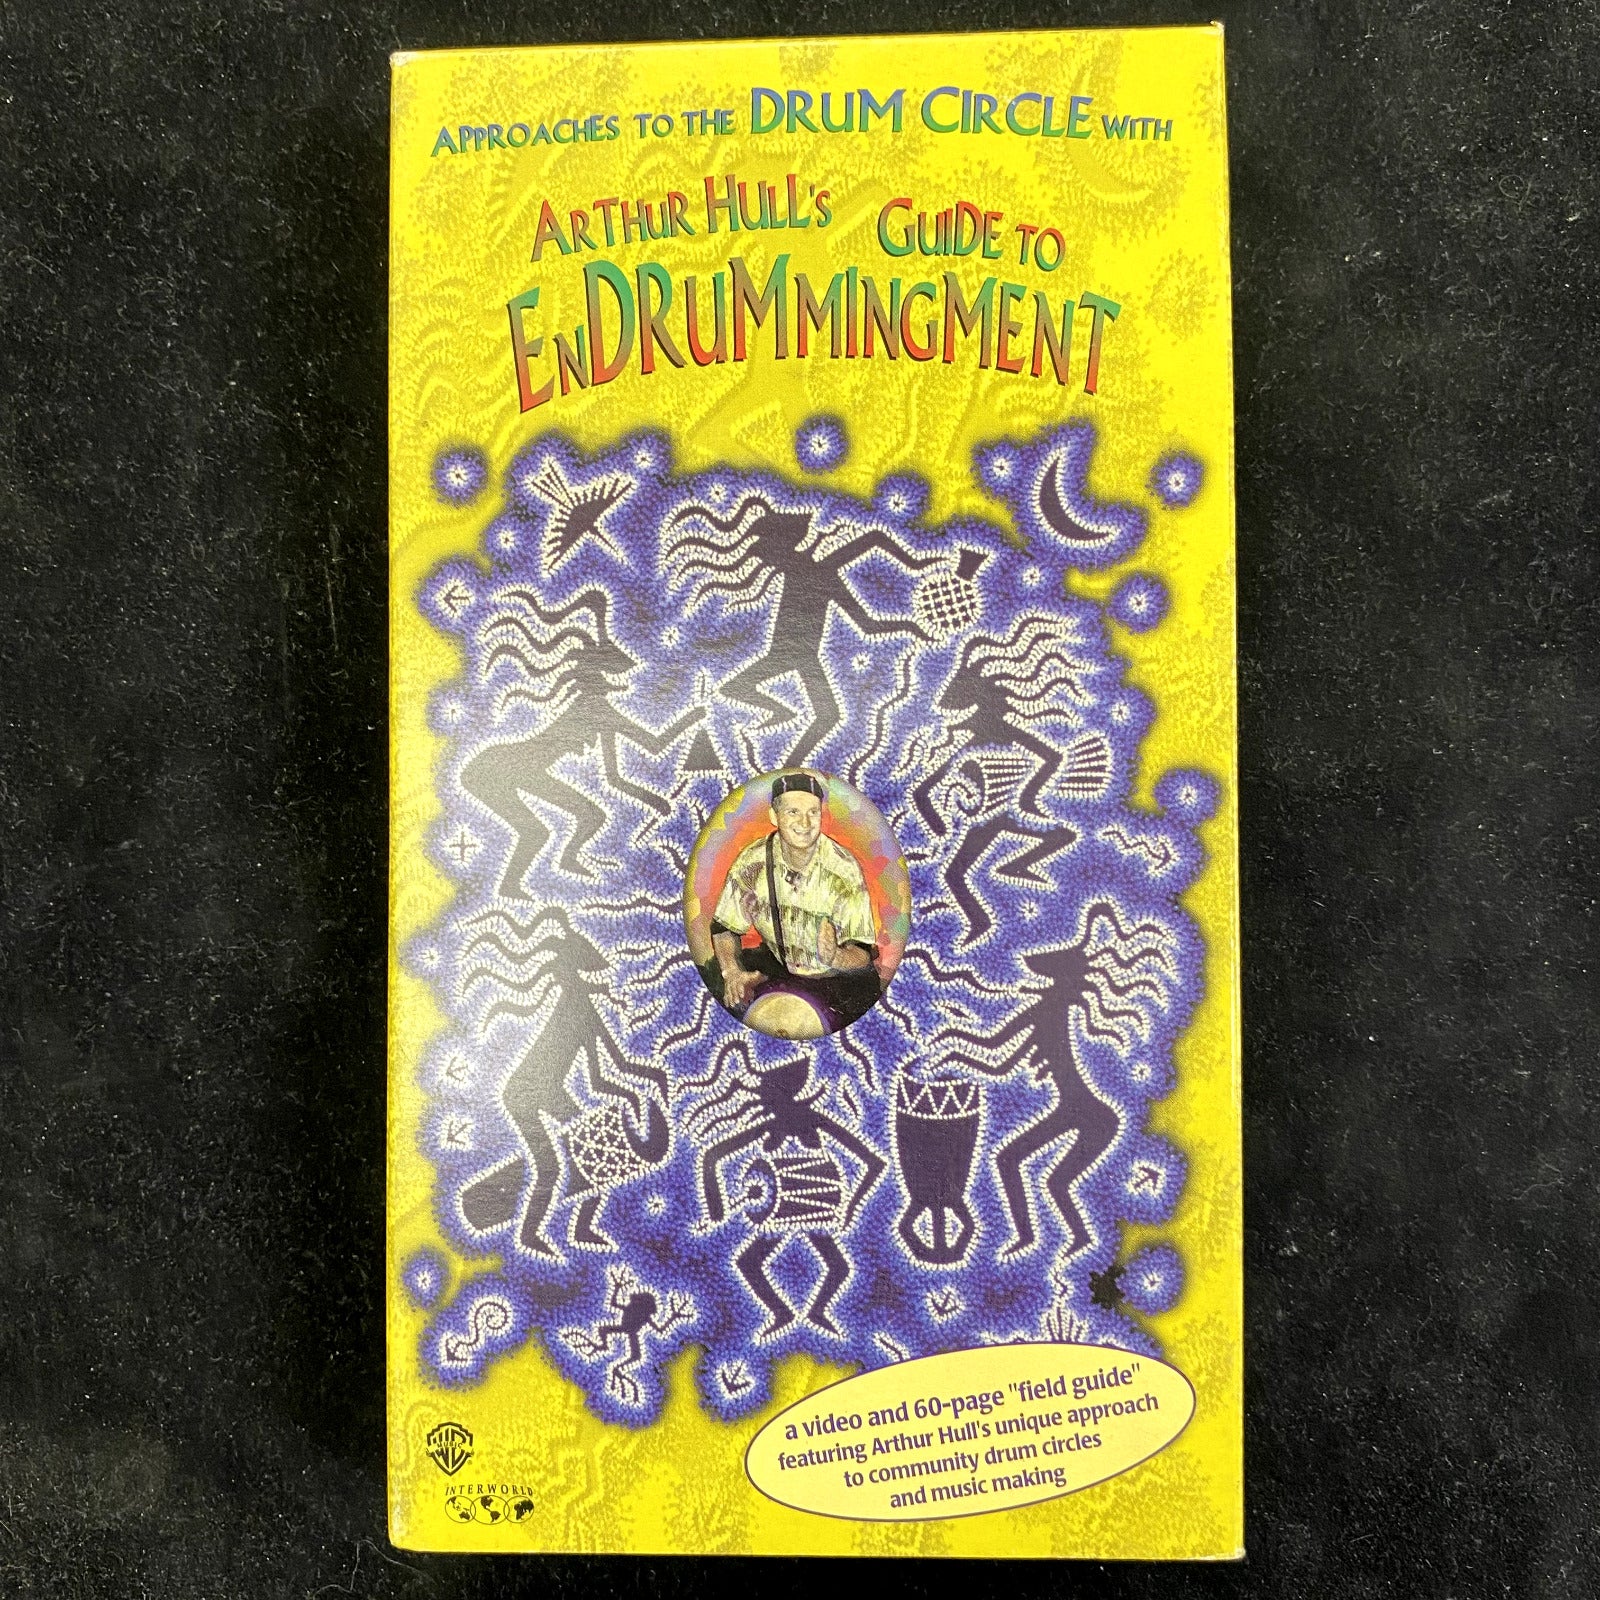 Arthur Hull - Guide to Endrummingment VHS Approaches to the Drum Circle